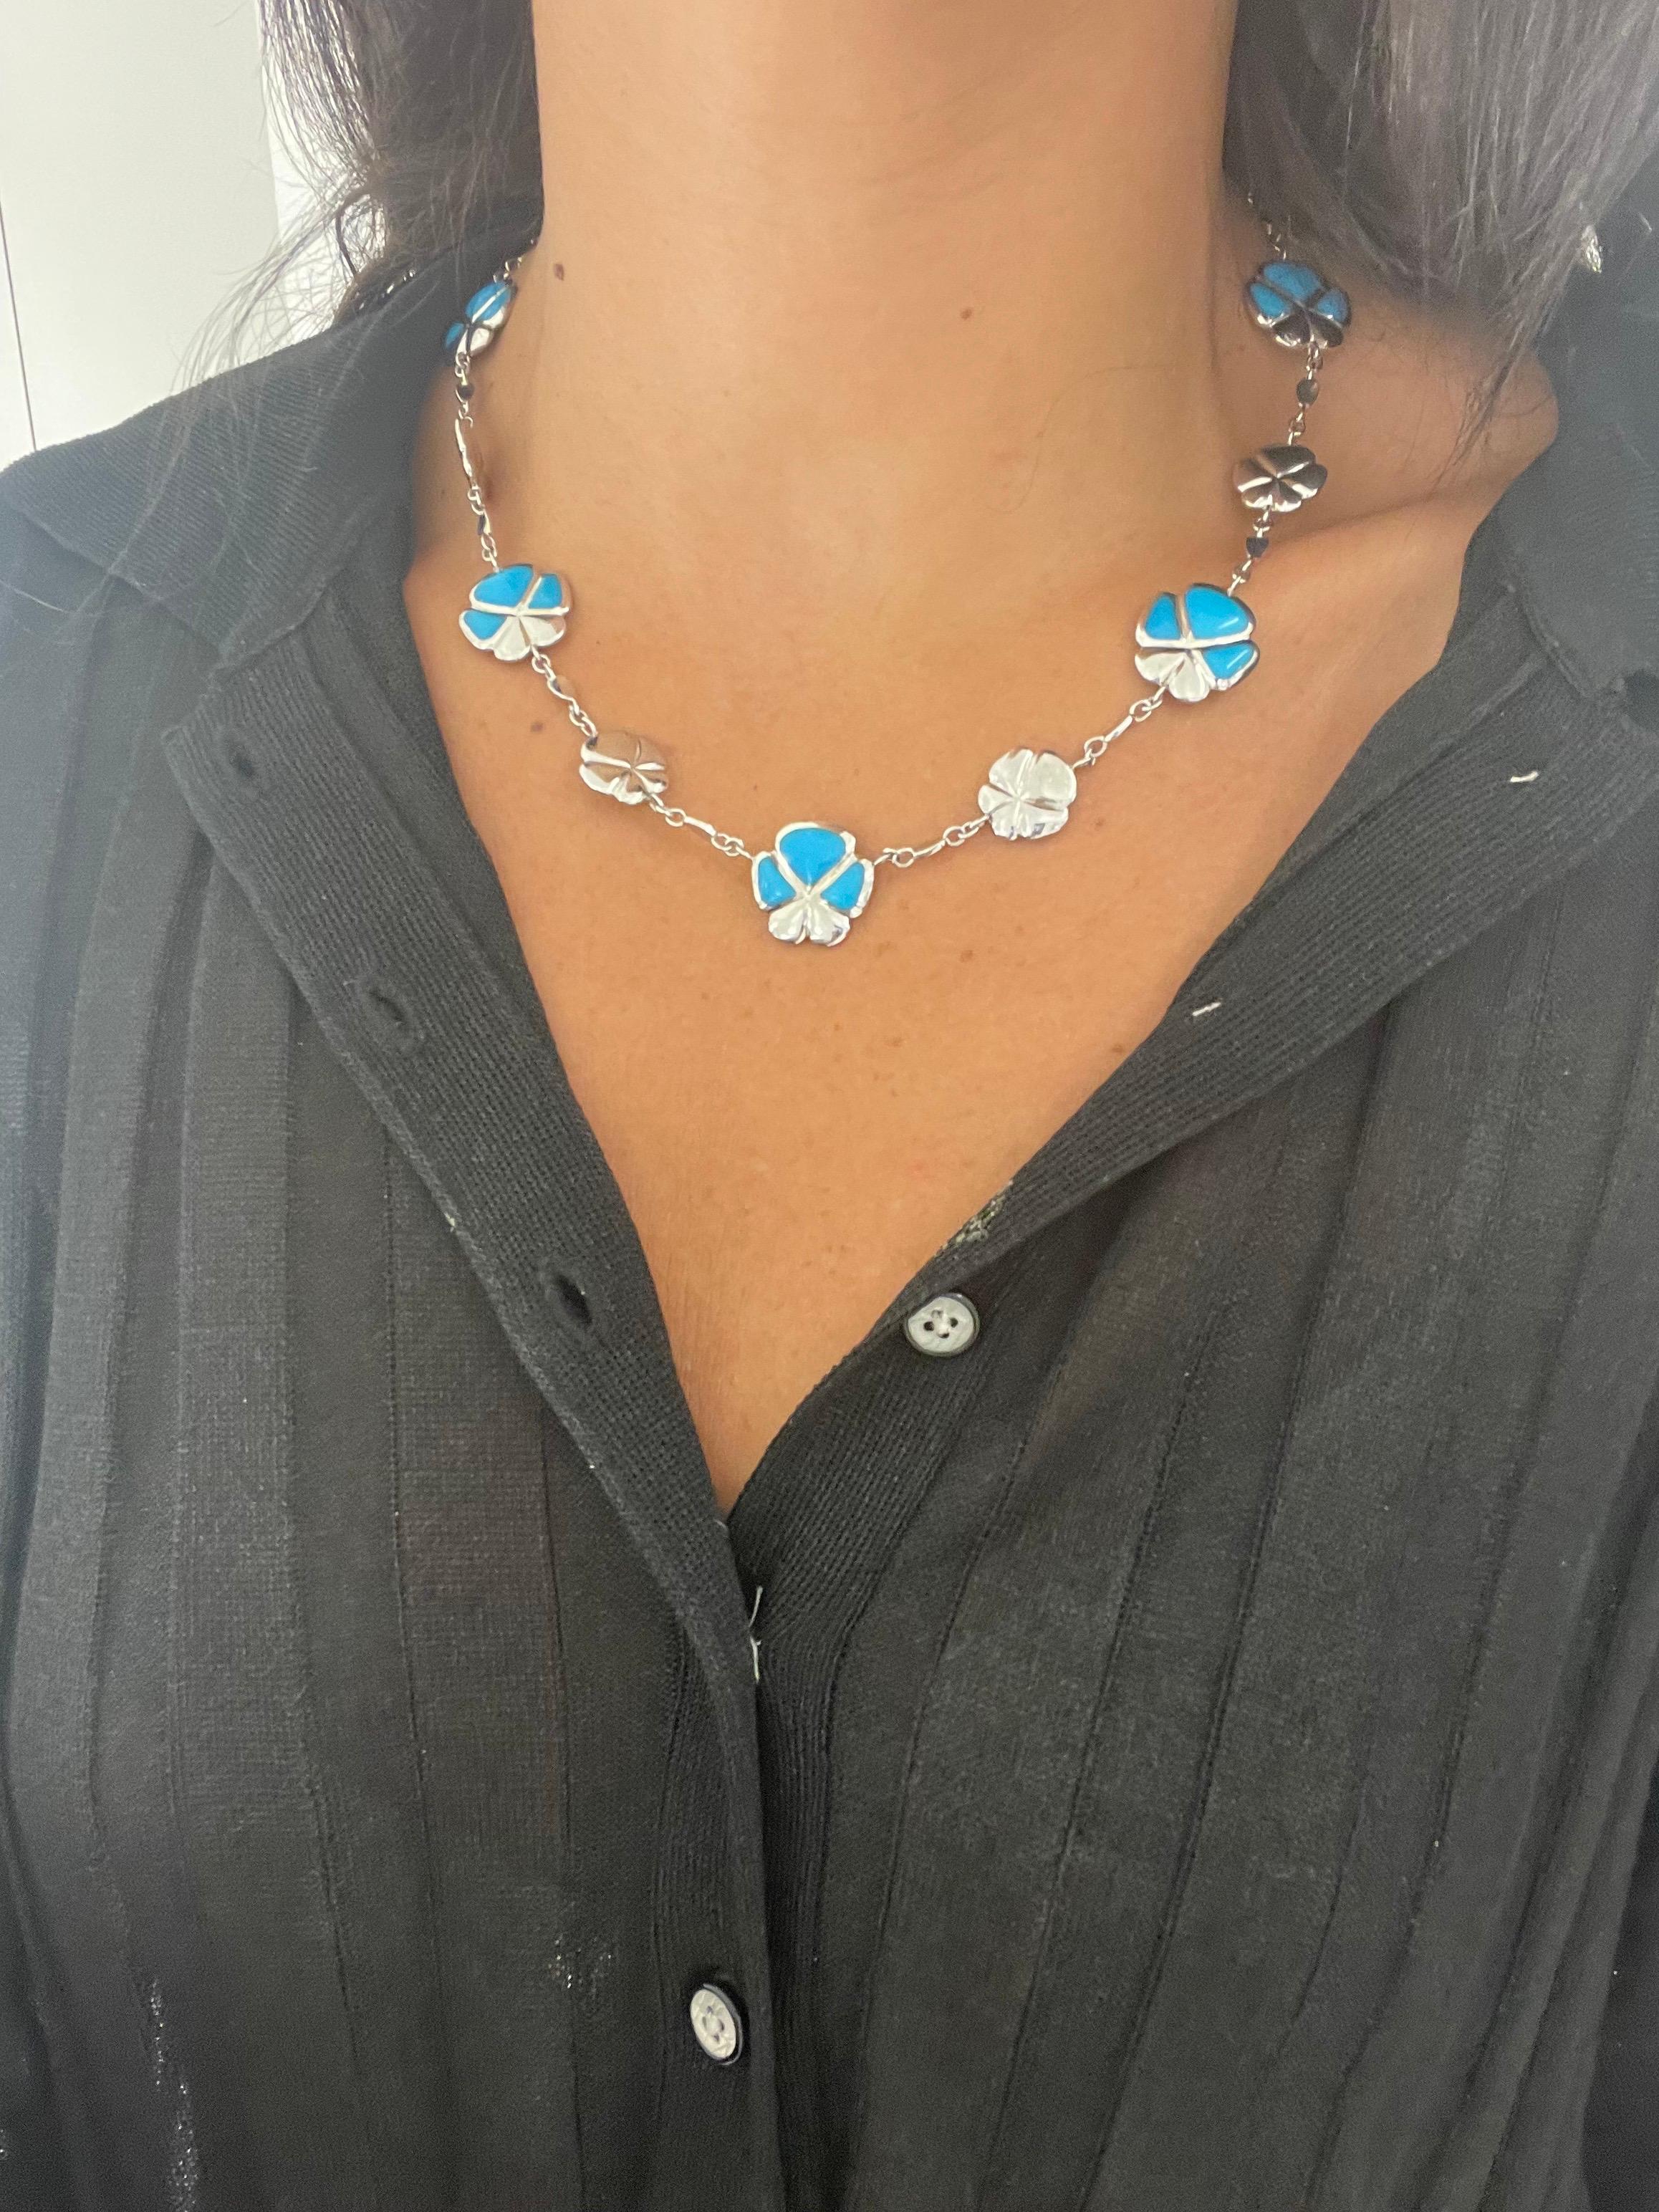 Created by famed Italian Jewelers, De AMBROSI, exclusively for Cellini Jewelers this flower necklace is inlaid with turquoise alternating with small white gold flowers. As a show of the excellent craftsmanship the flowers are completely reversible,